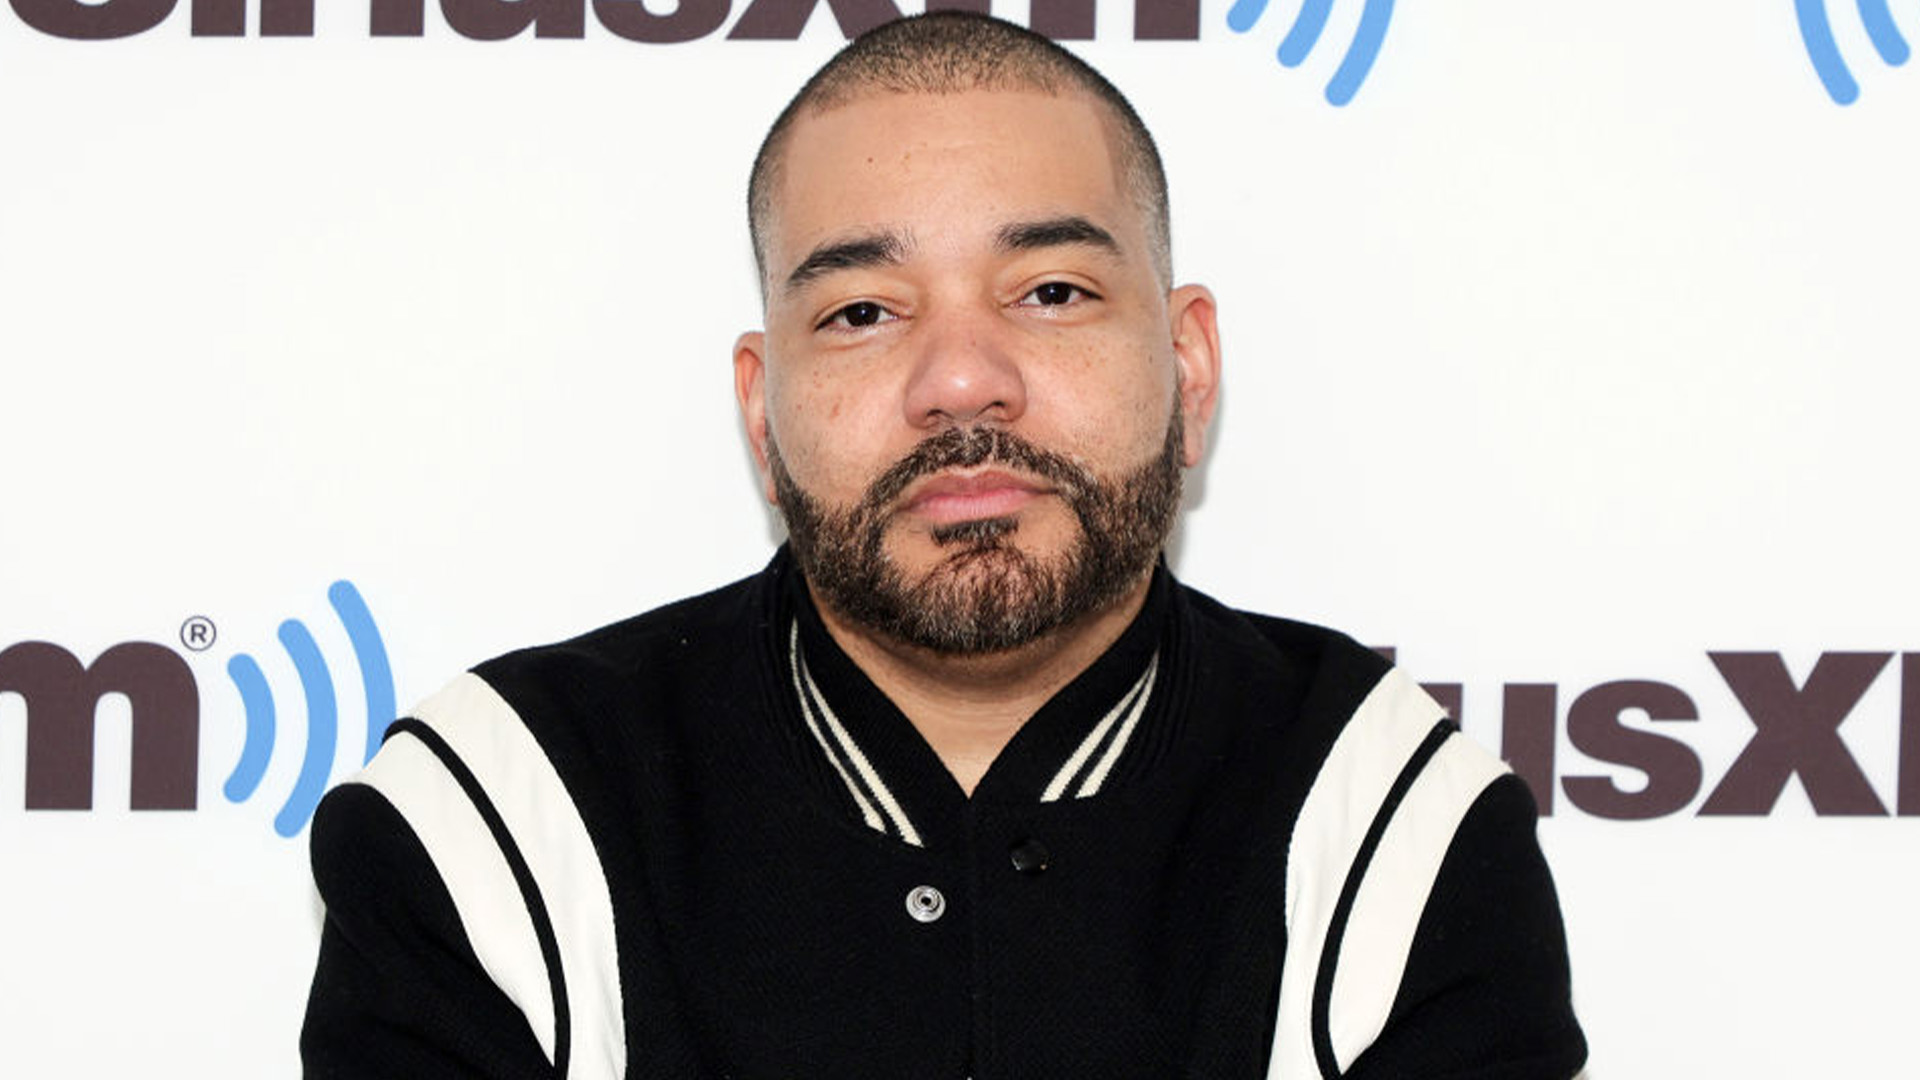 DJ Envy Claims He's Also A Victim Of Real Estate Fraud Despite Similar Claims Against Him, Alleges He Lost $500K